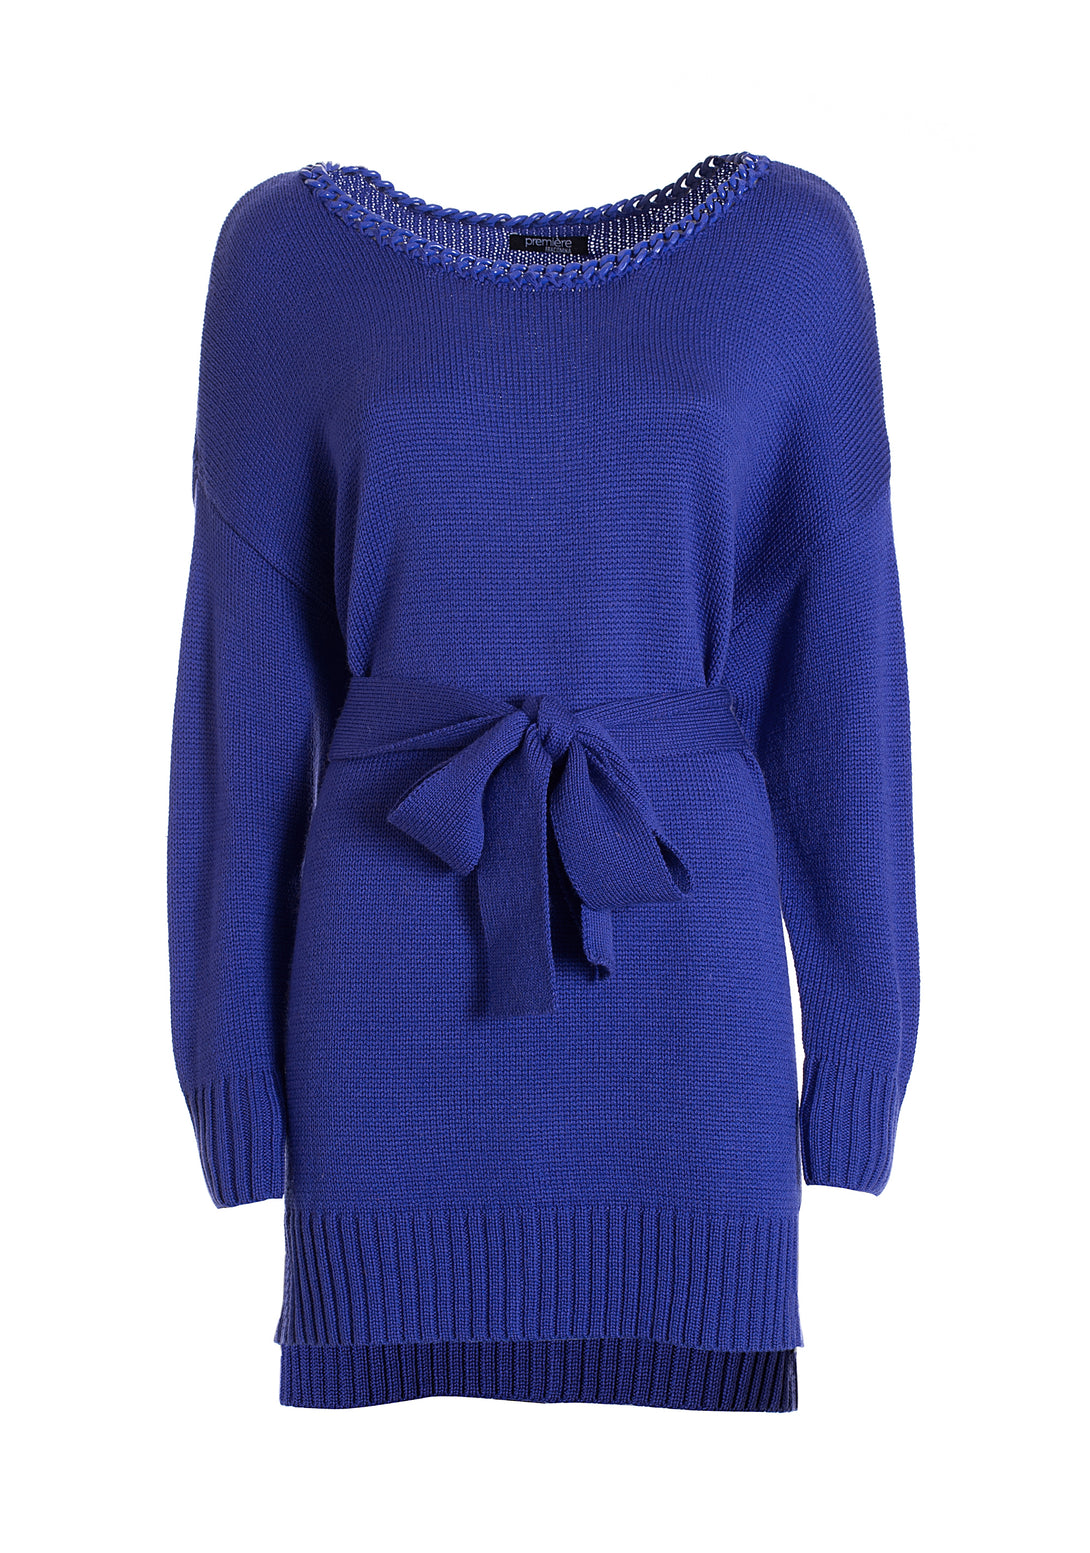 Dress regular fit, middle length, made in mixed wool